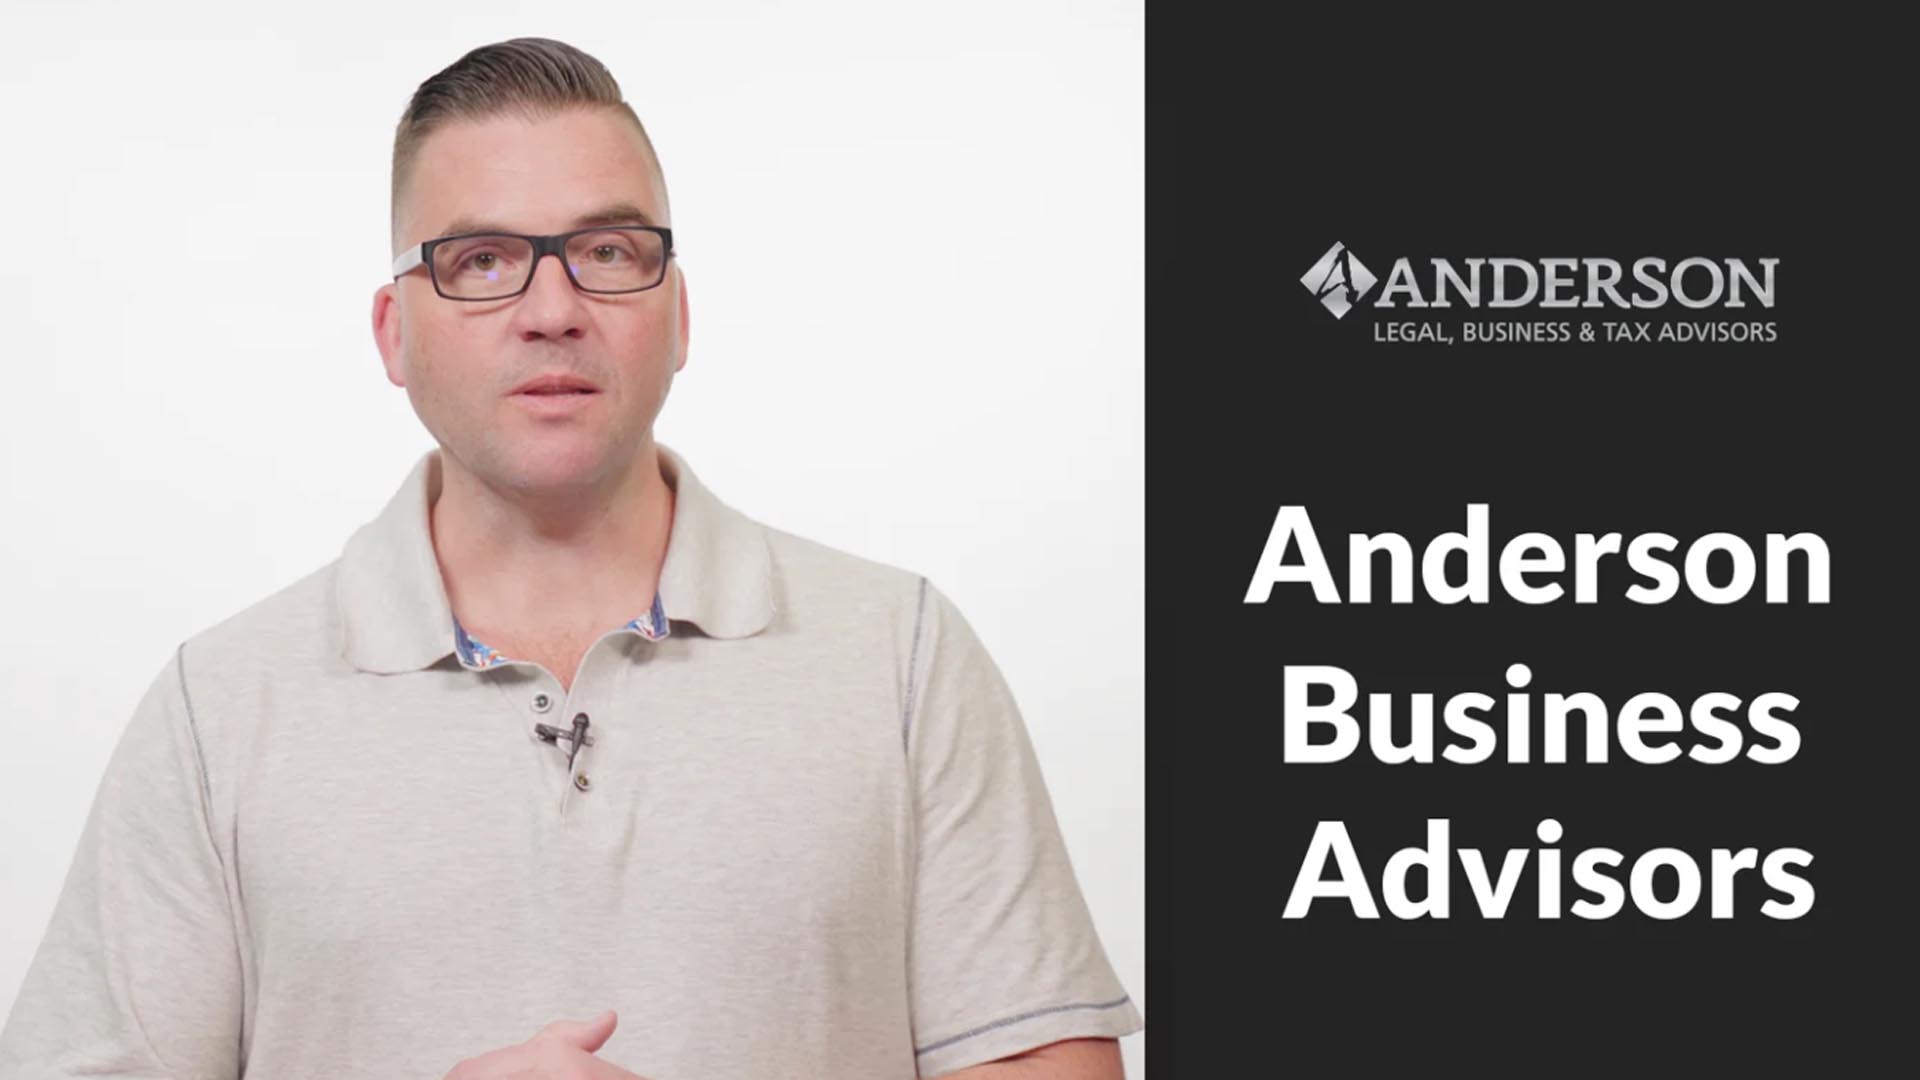 Anderson Business Advisors: Client Reviews and Testimonials